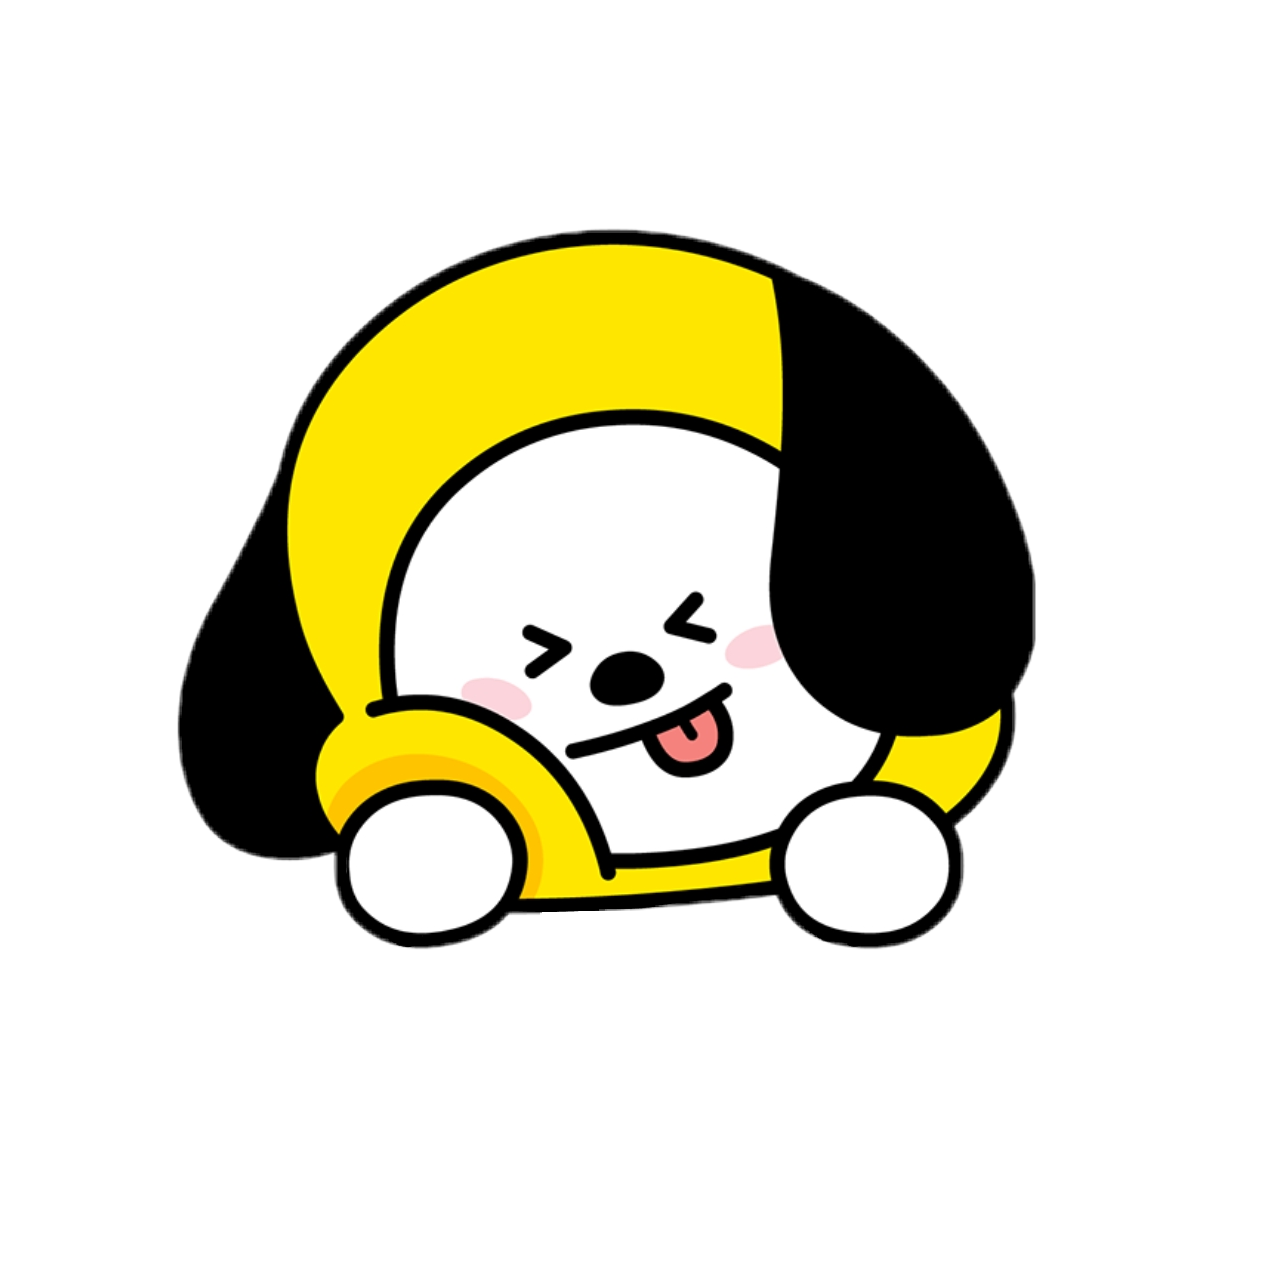 Download Emoticon Sticker Smiley Wings Bts Free PNG HQ HQ PNG Image ...